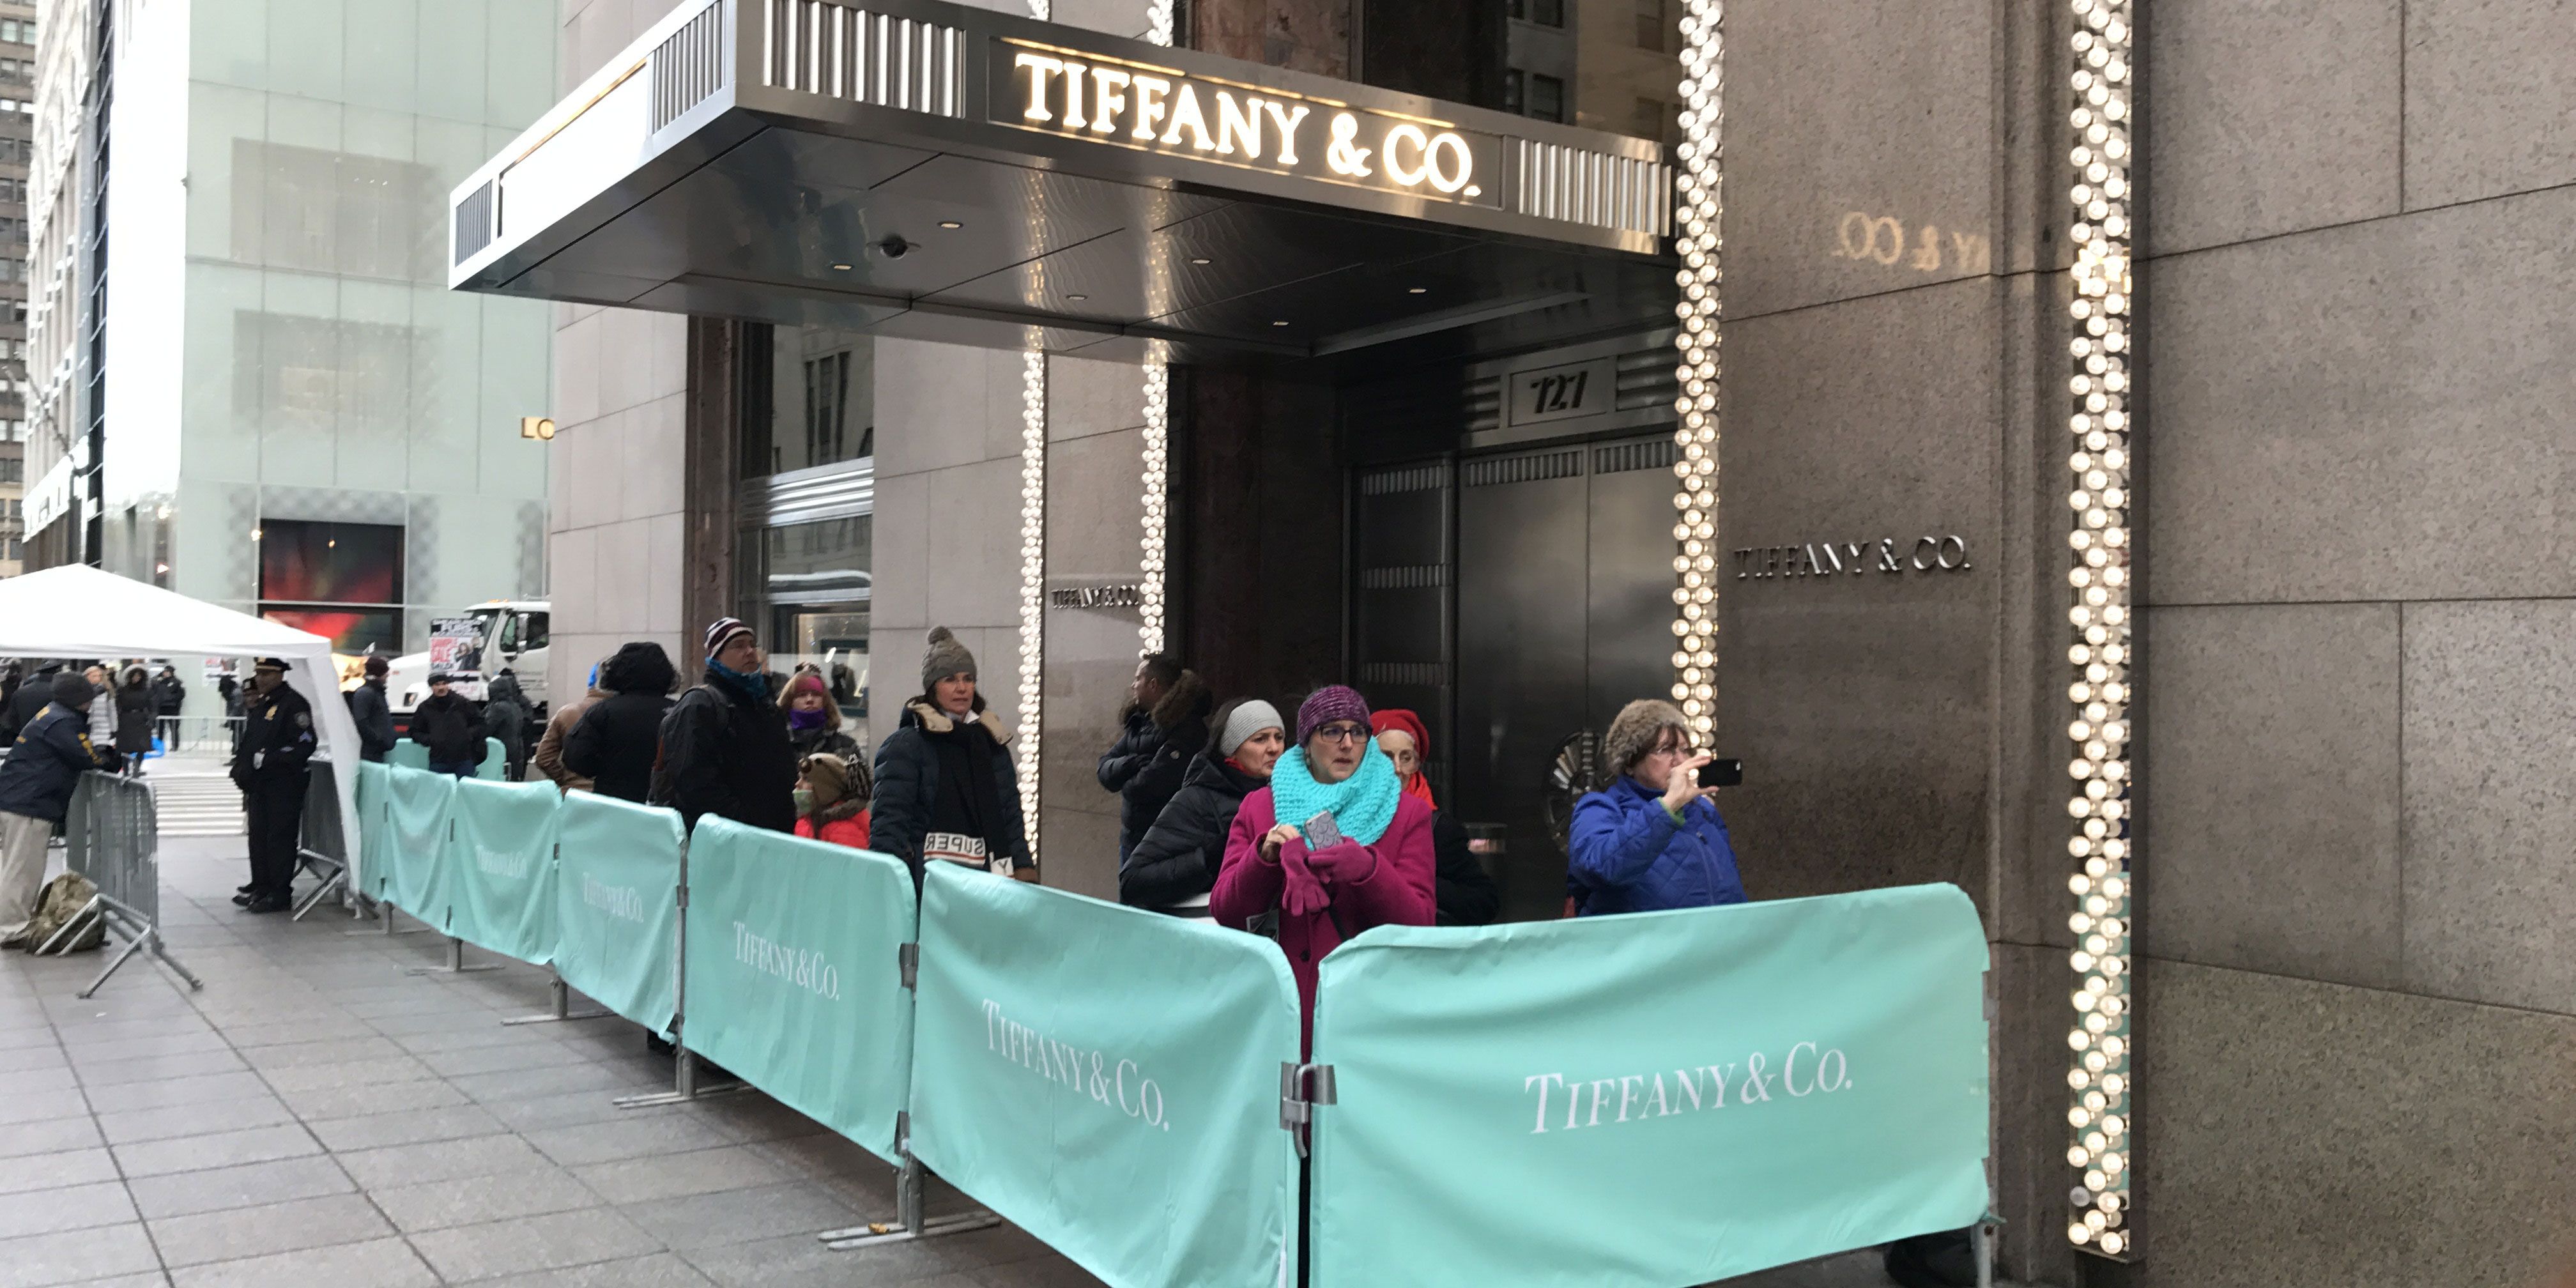 Tiffany customers ditching blue bags for plain ones as NYC crime soars